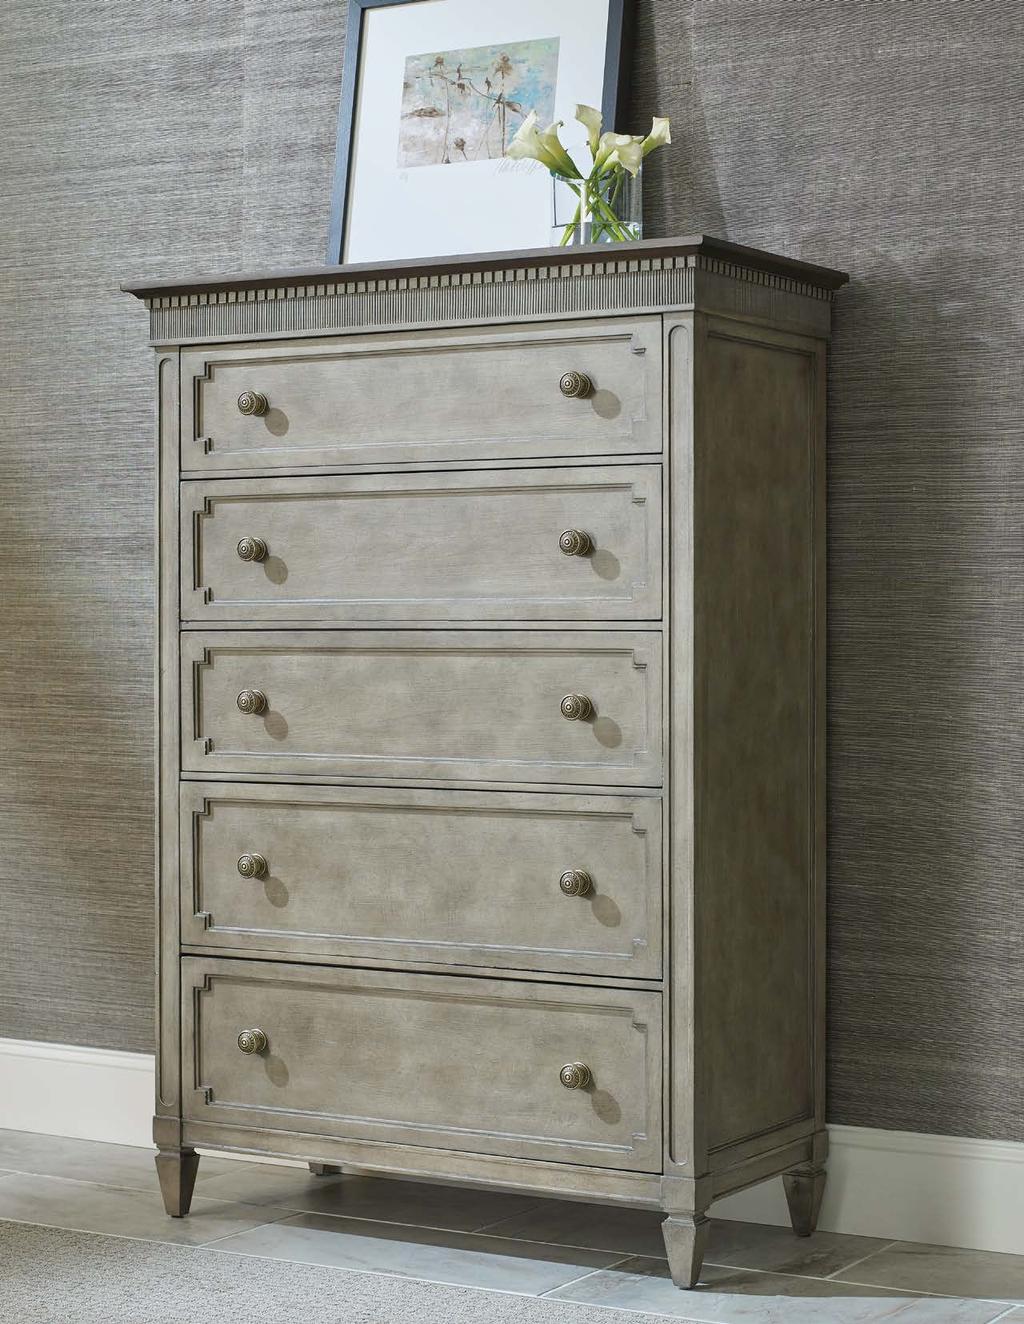 Savona design inspiration is European provincial that has Gustavian influences from Swedish, French and Italian